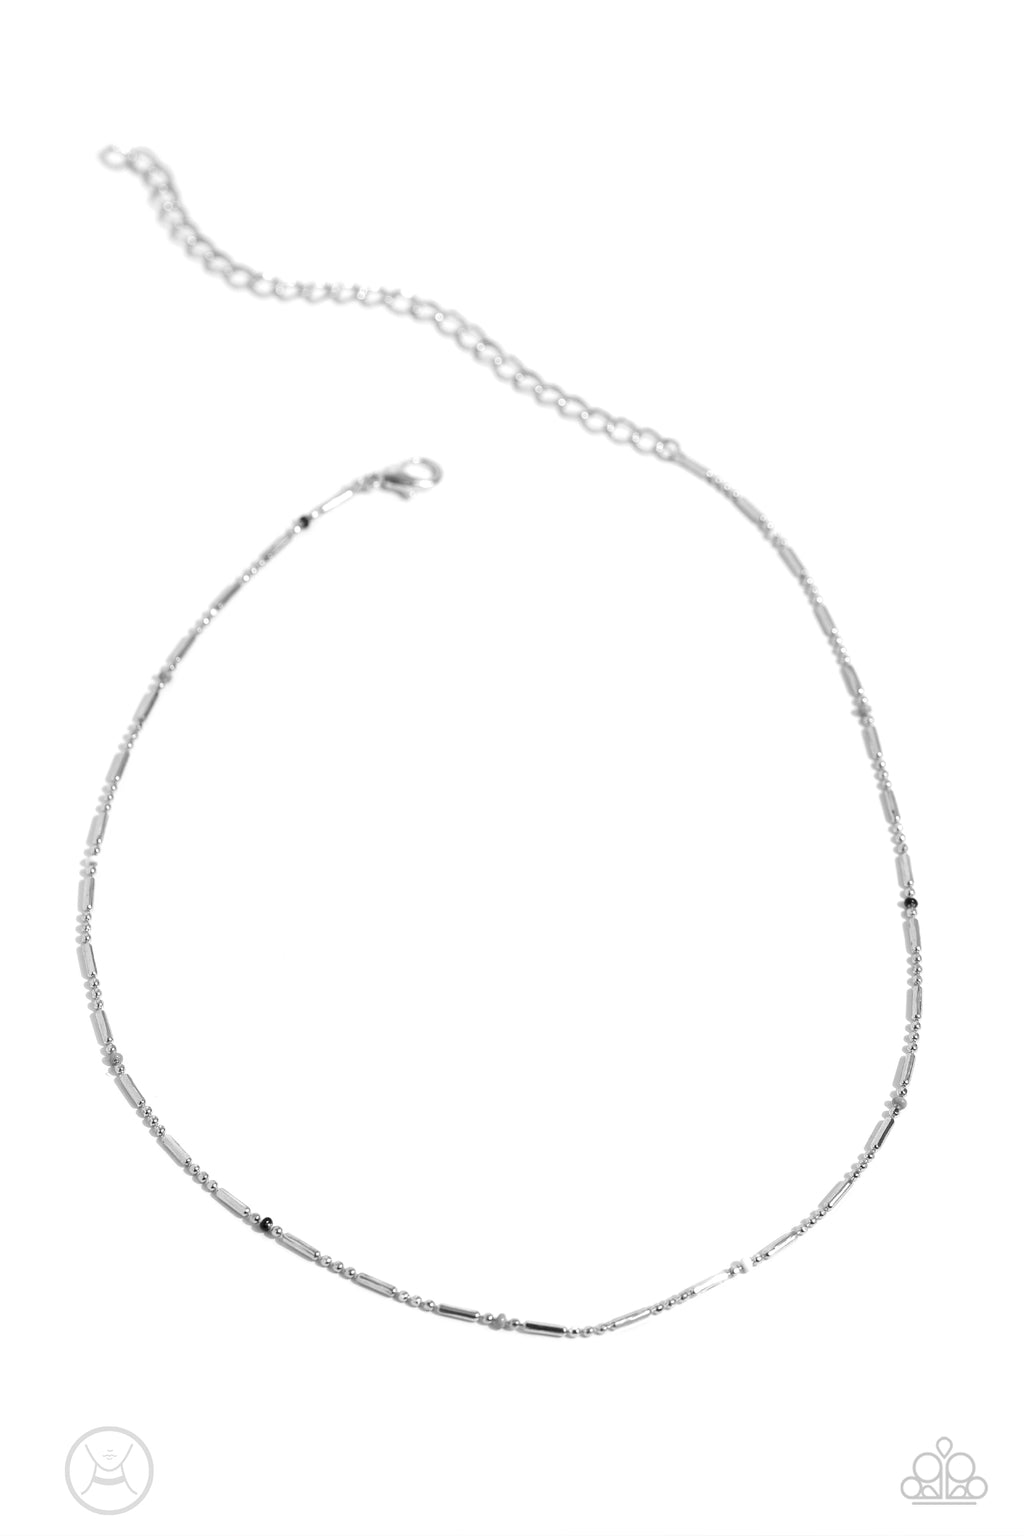 five-dollar-jewelry-serenity-strand-silver-necklace-paparazzi-accessories